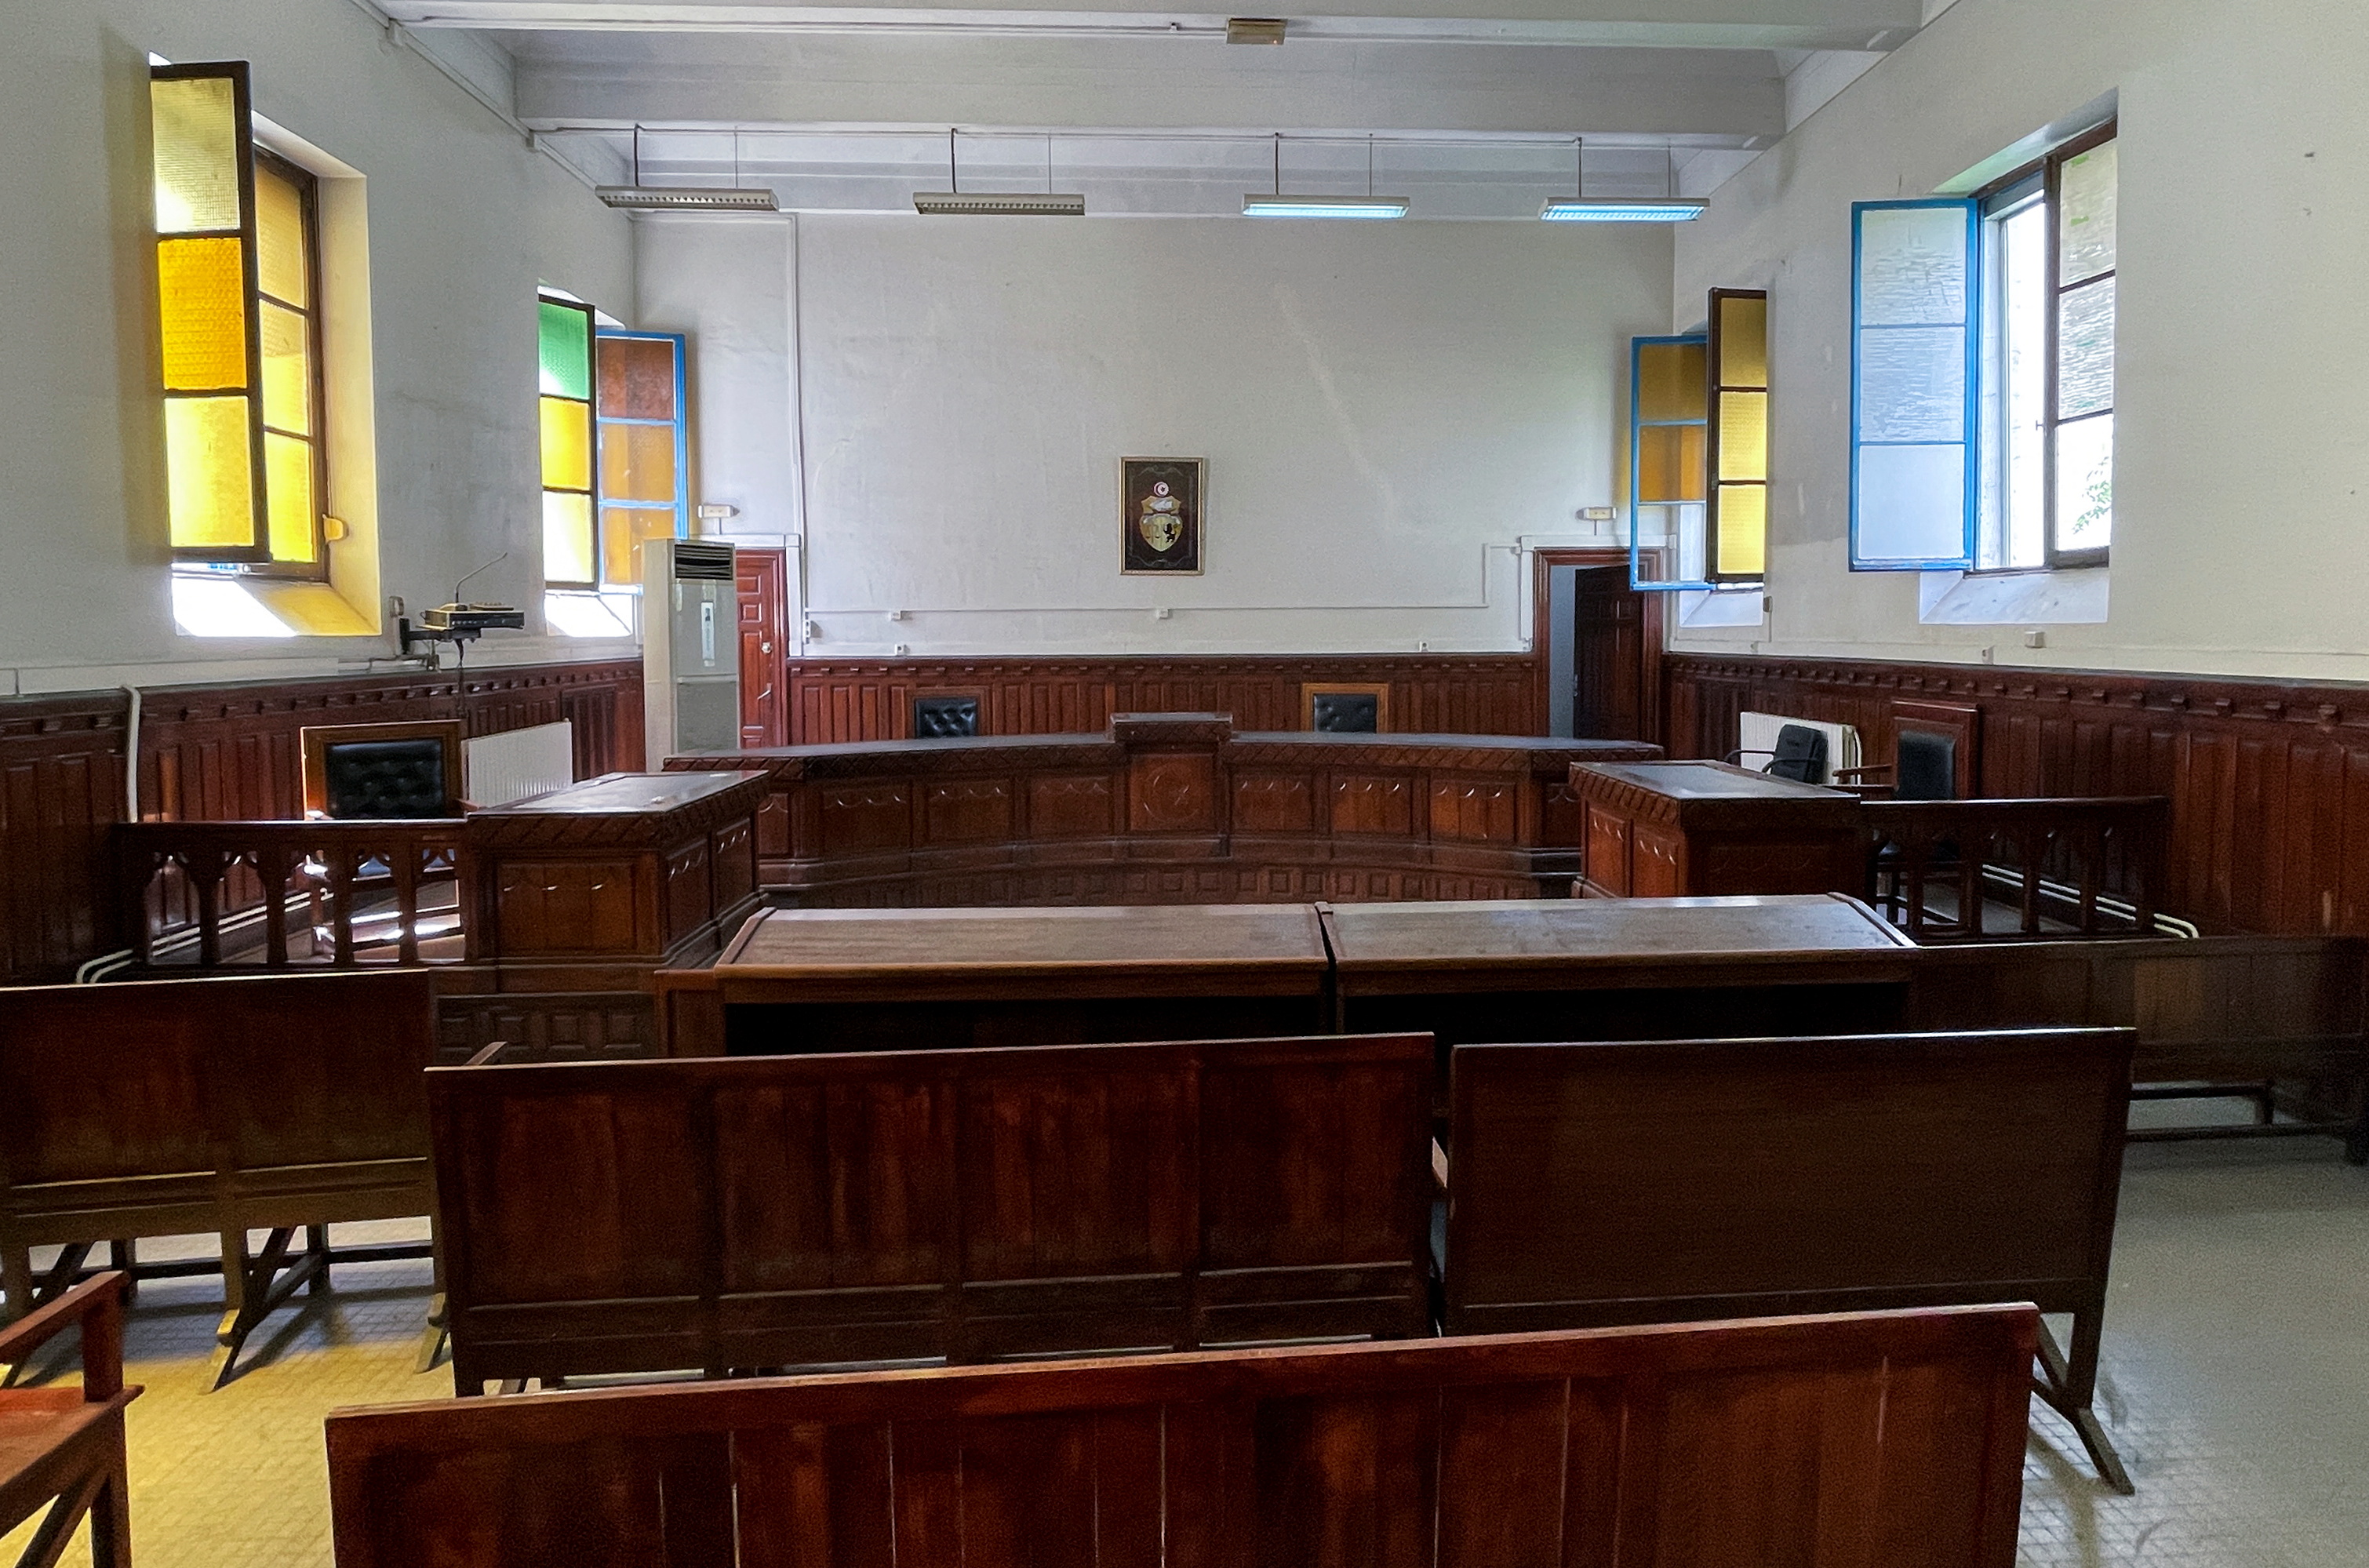 A view shows an empty courtroom during a strike by Tunisian judges in Tunis